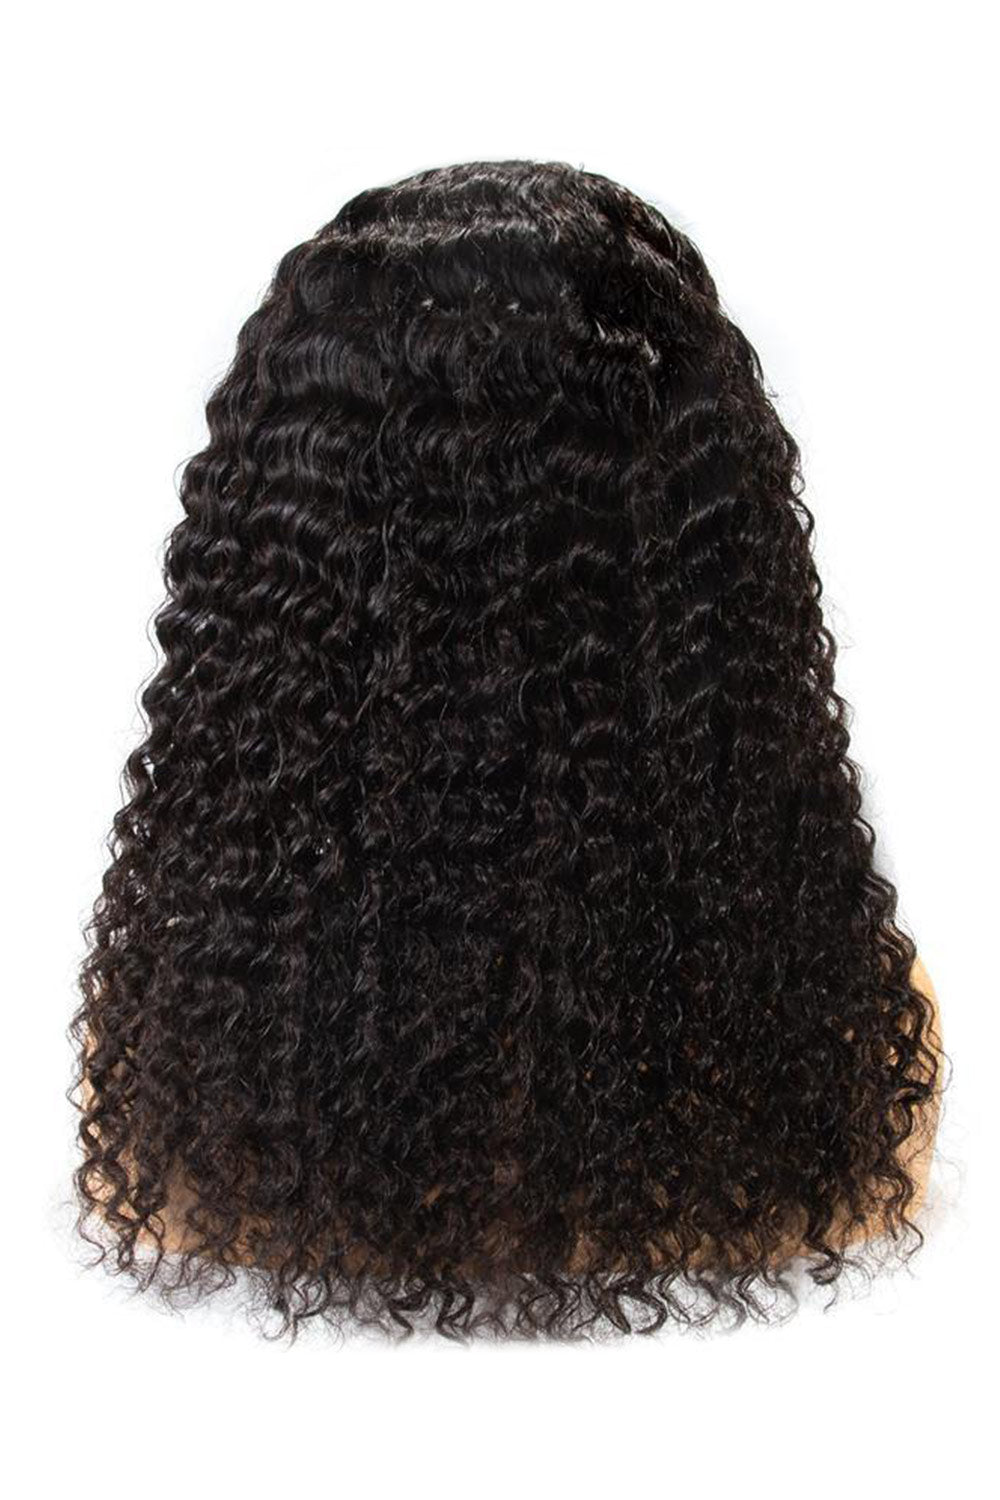 13x4 Full Frontal Lace Wigs Glueless Curly Black Hair Pre-plucked